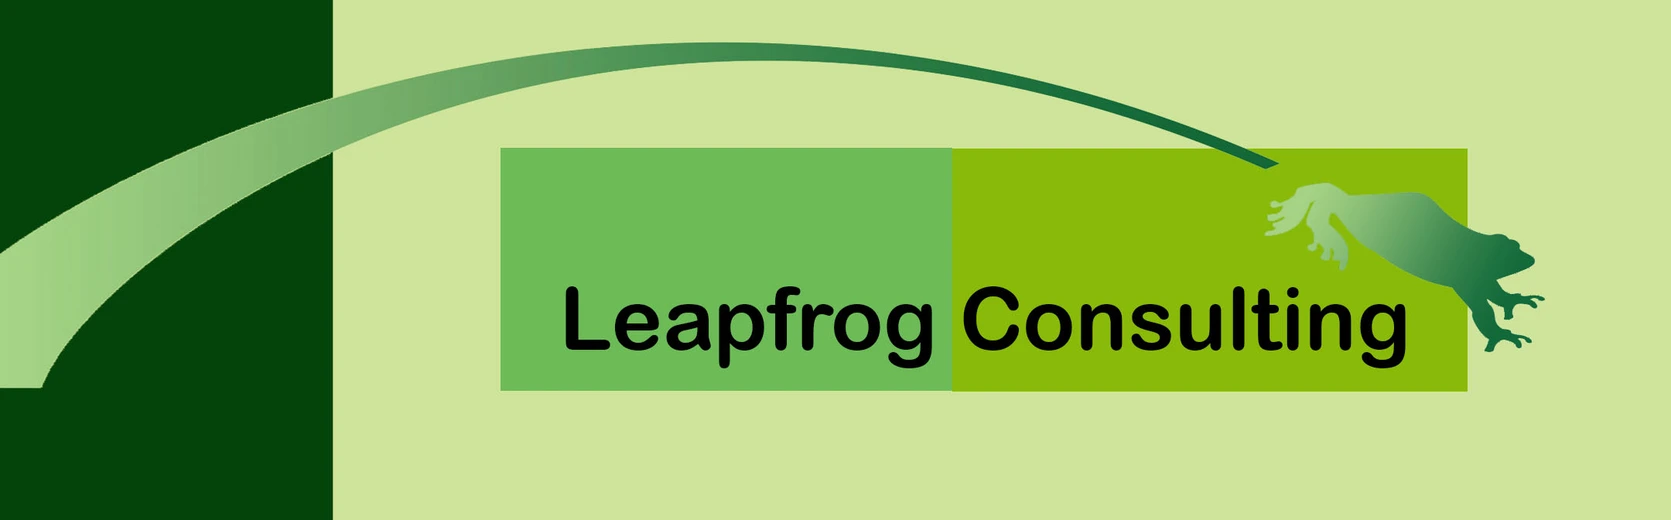 Leapfrog-Consulting